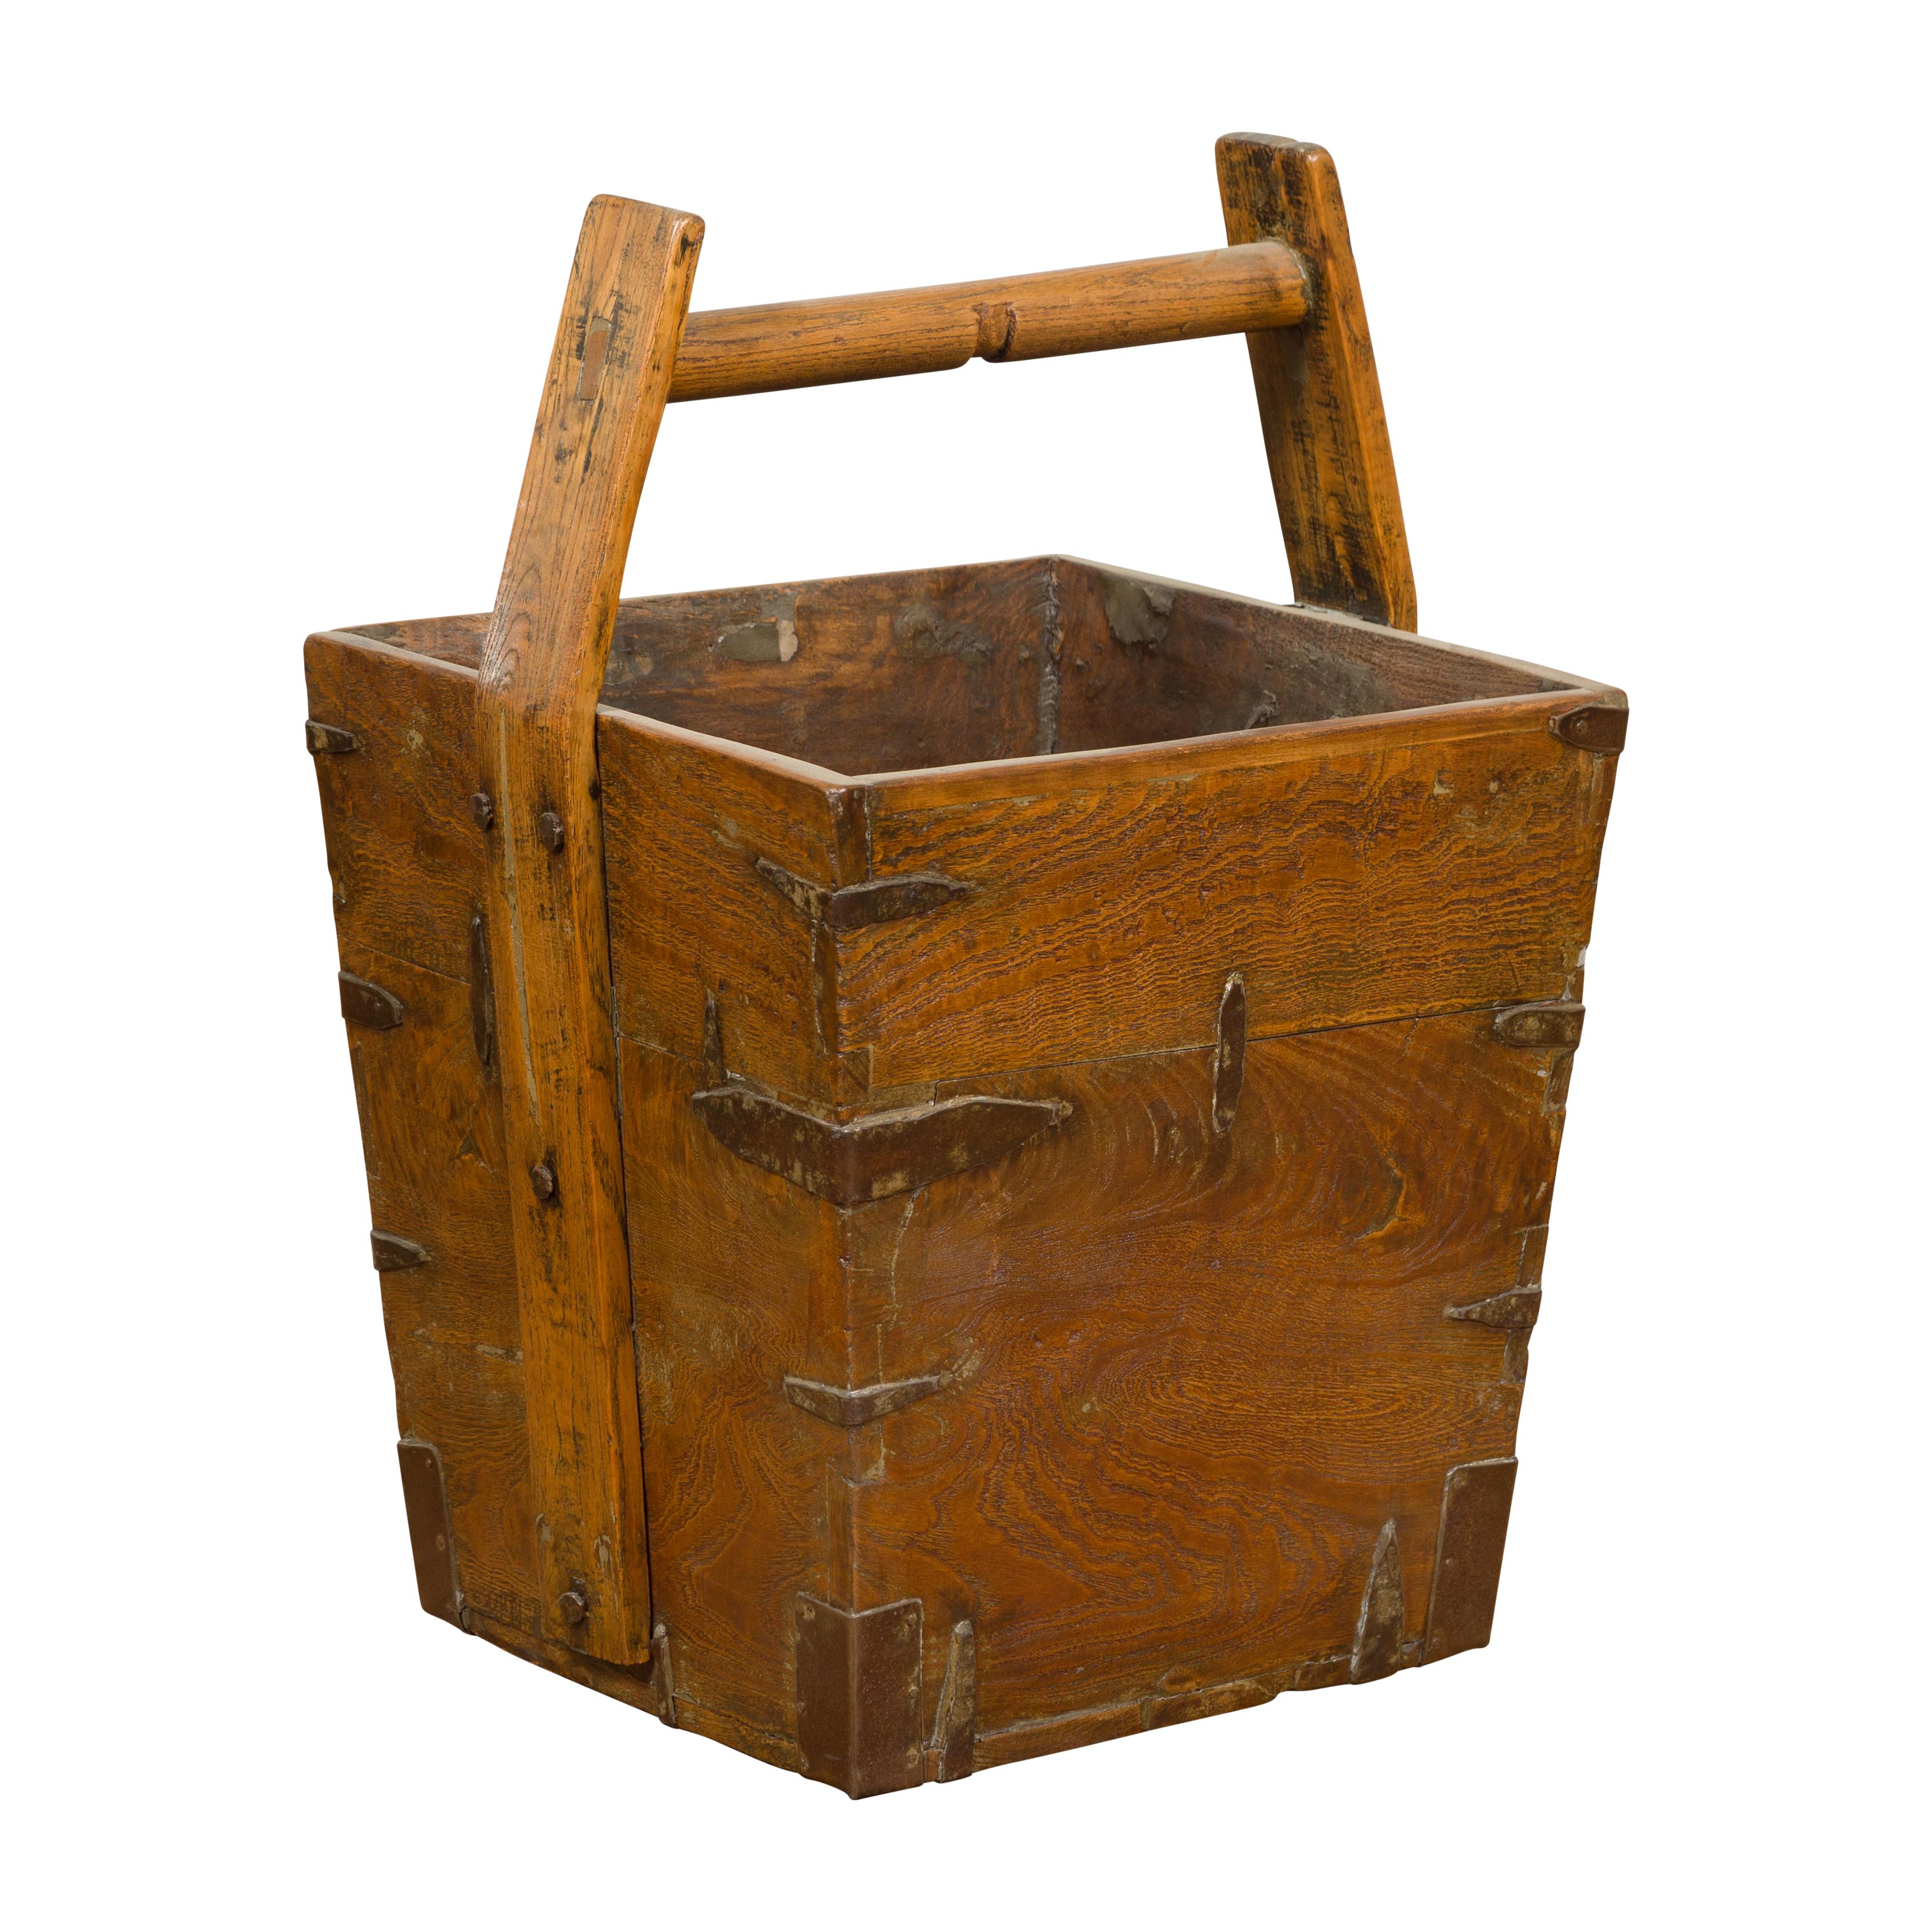 Antique Chinese 19th Century Wood and Metal Grain Basket with Carrying Handle For Sale 2